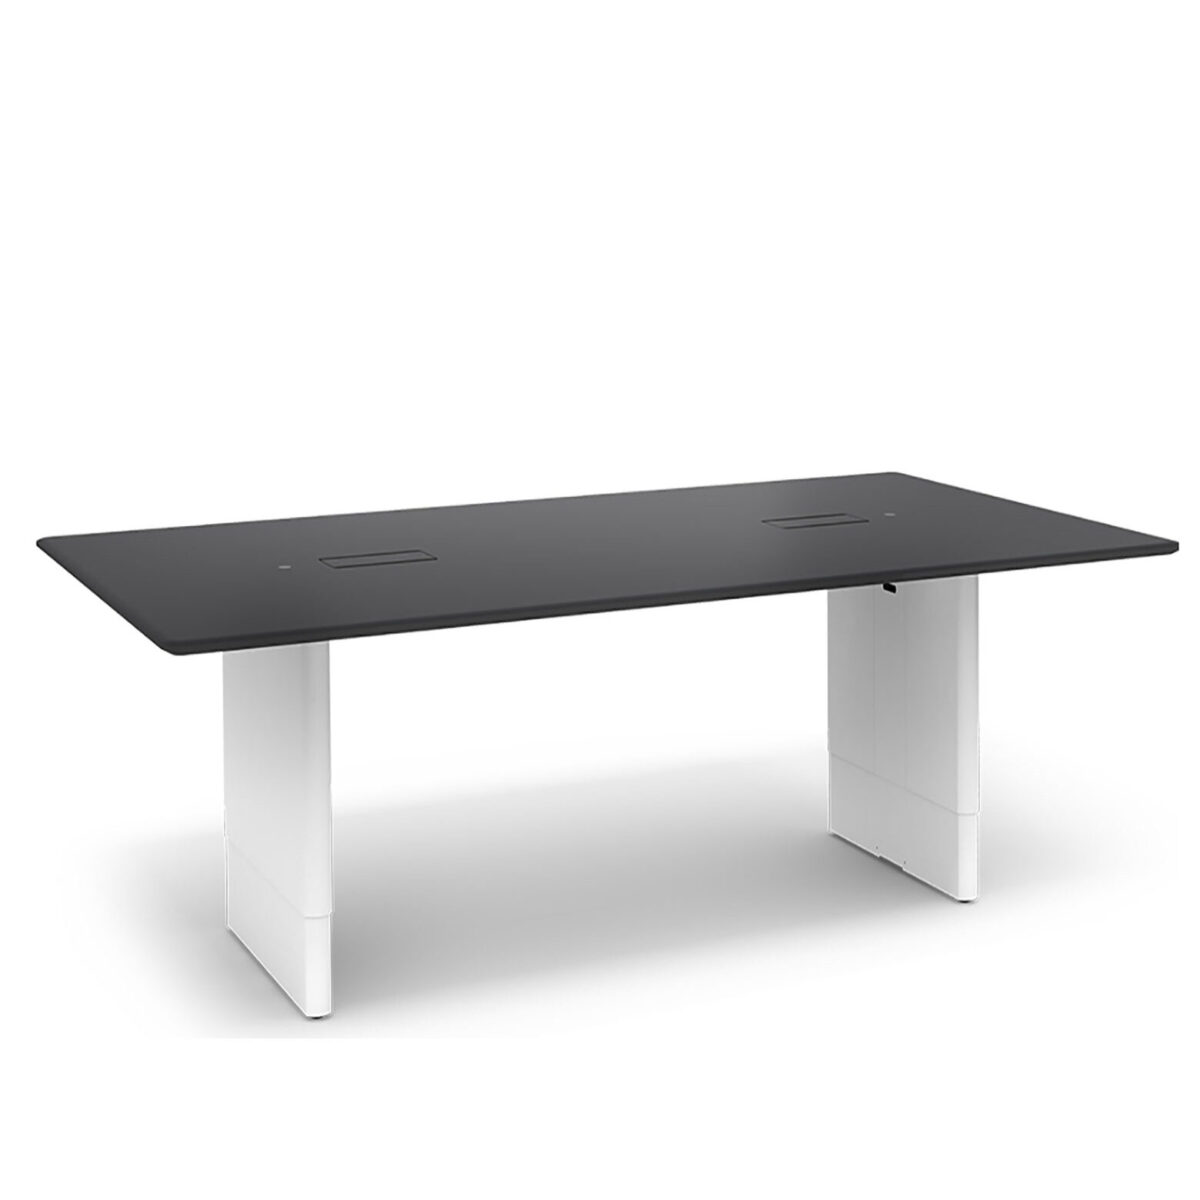 Watson iTia series adjustable height conference table